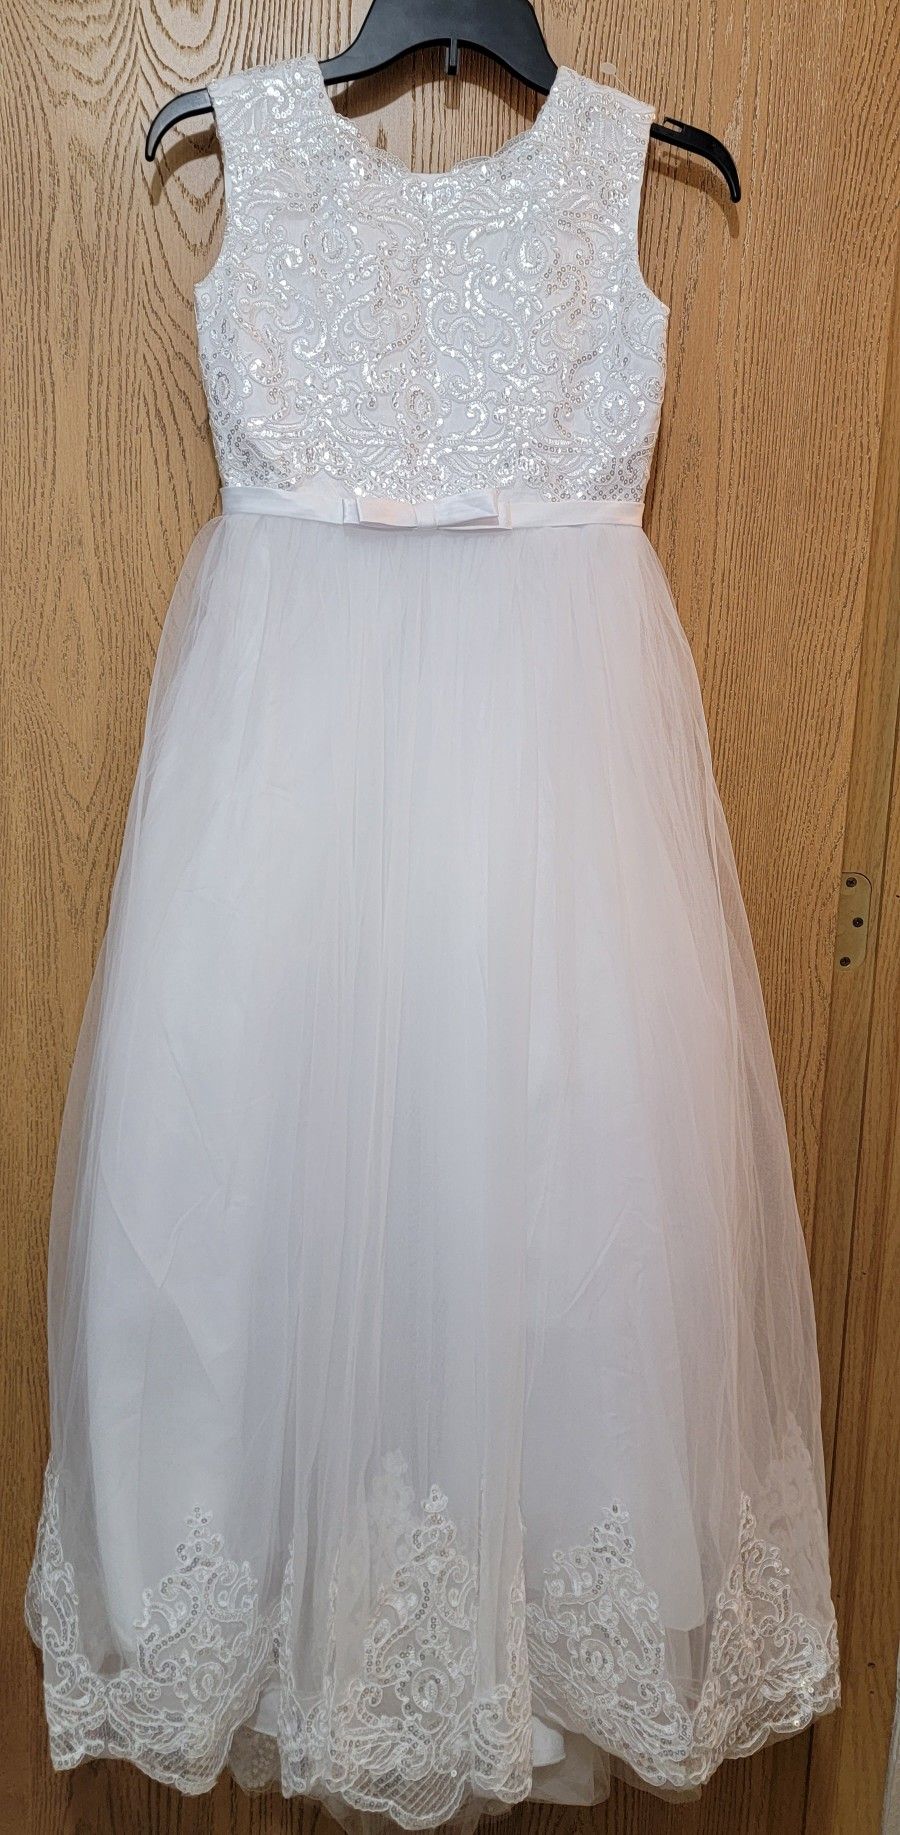 Quinceanera Dress With Vail & Gloves